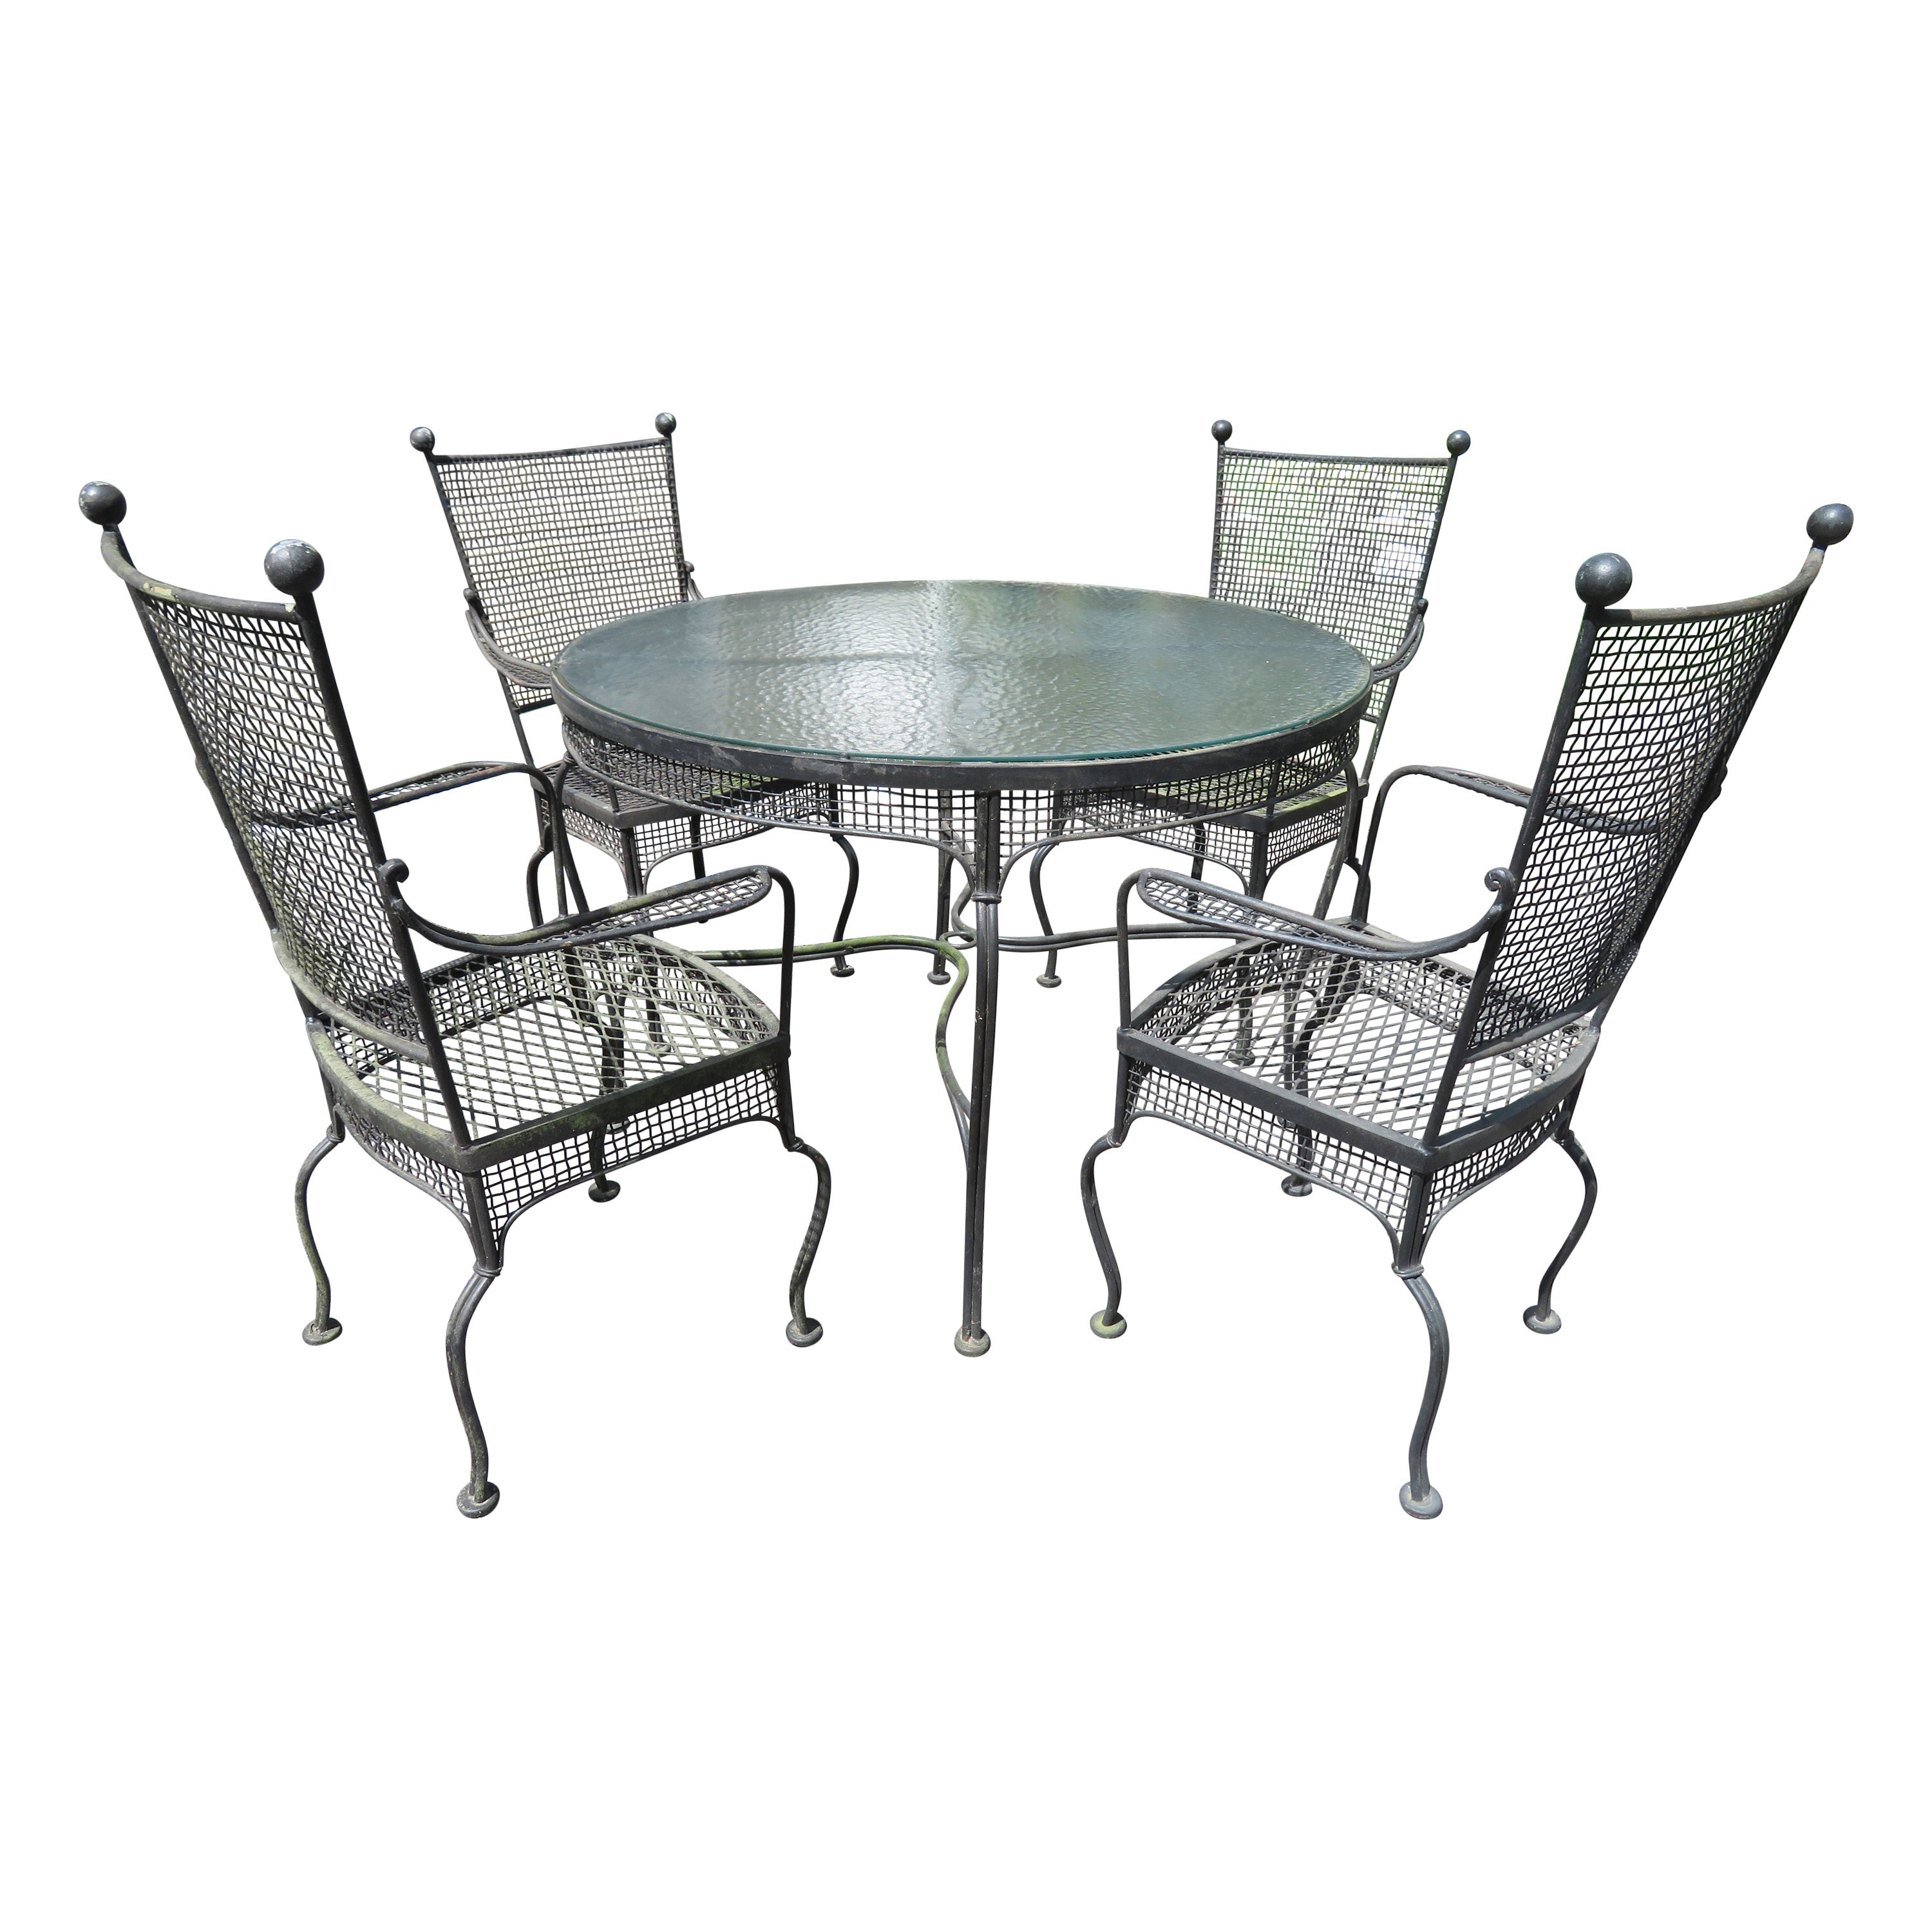 Sensational Early Set Russel Woodard Mesh Patio Table 4 Chairs Mid-Century For Sale